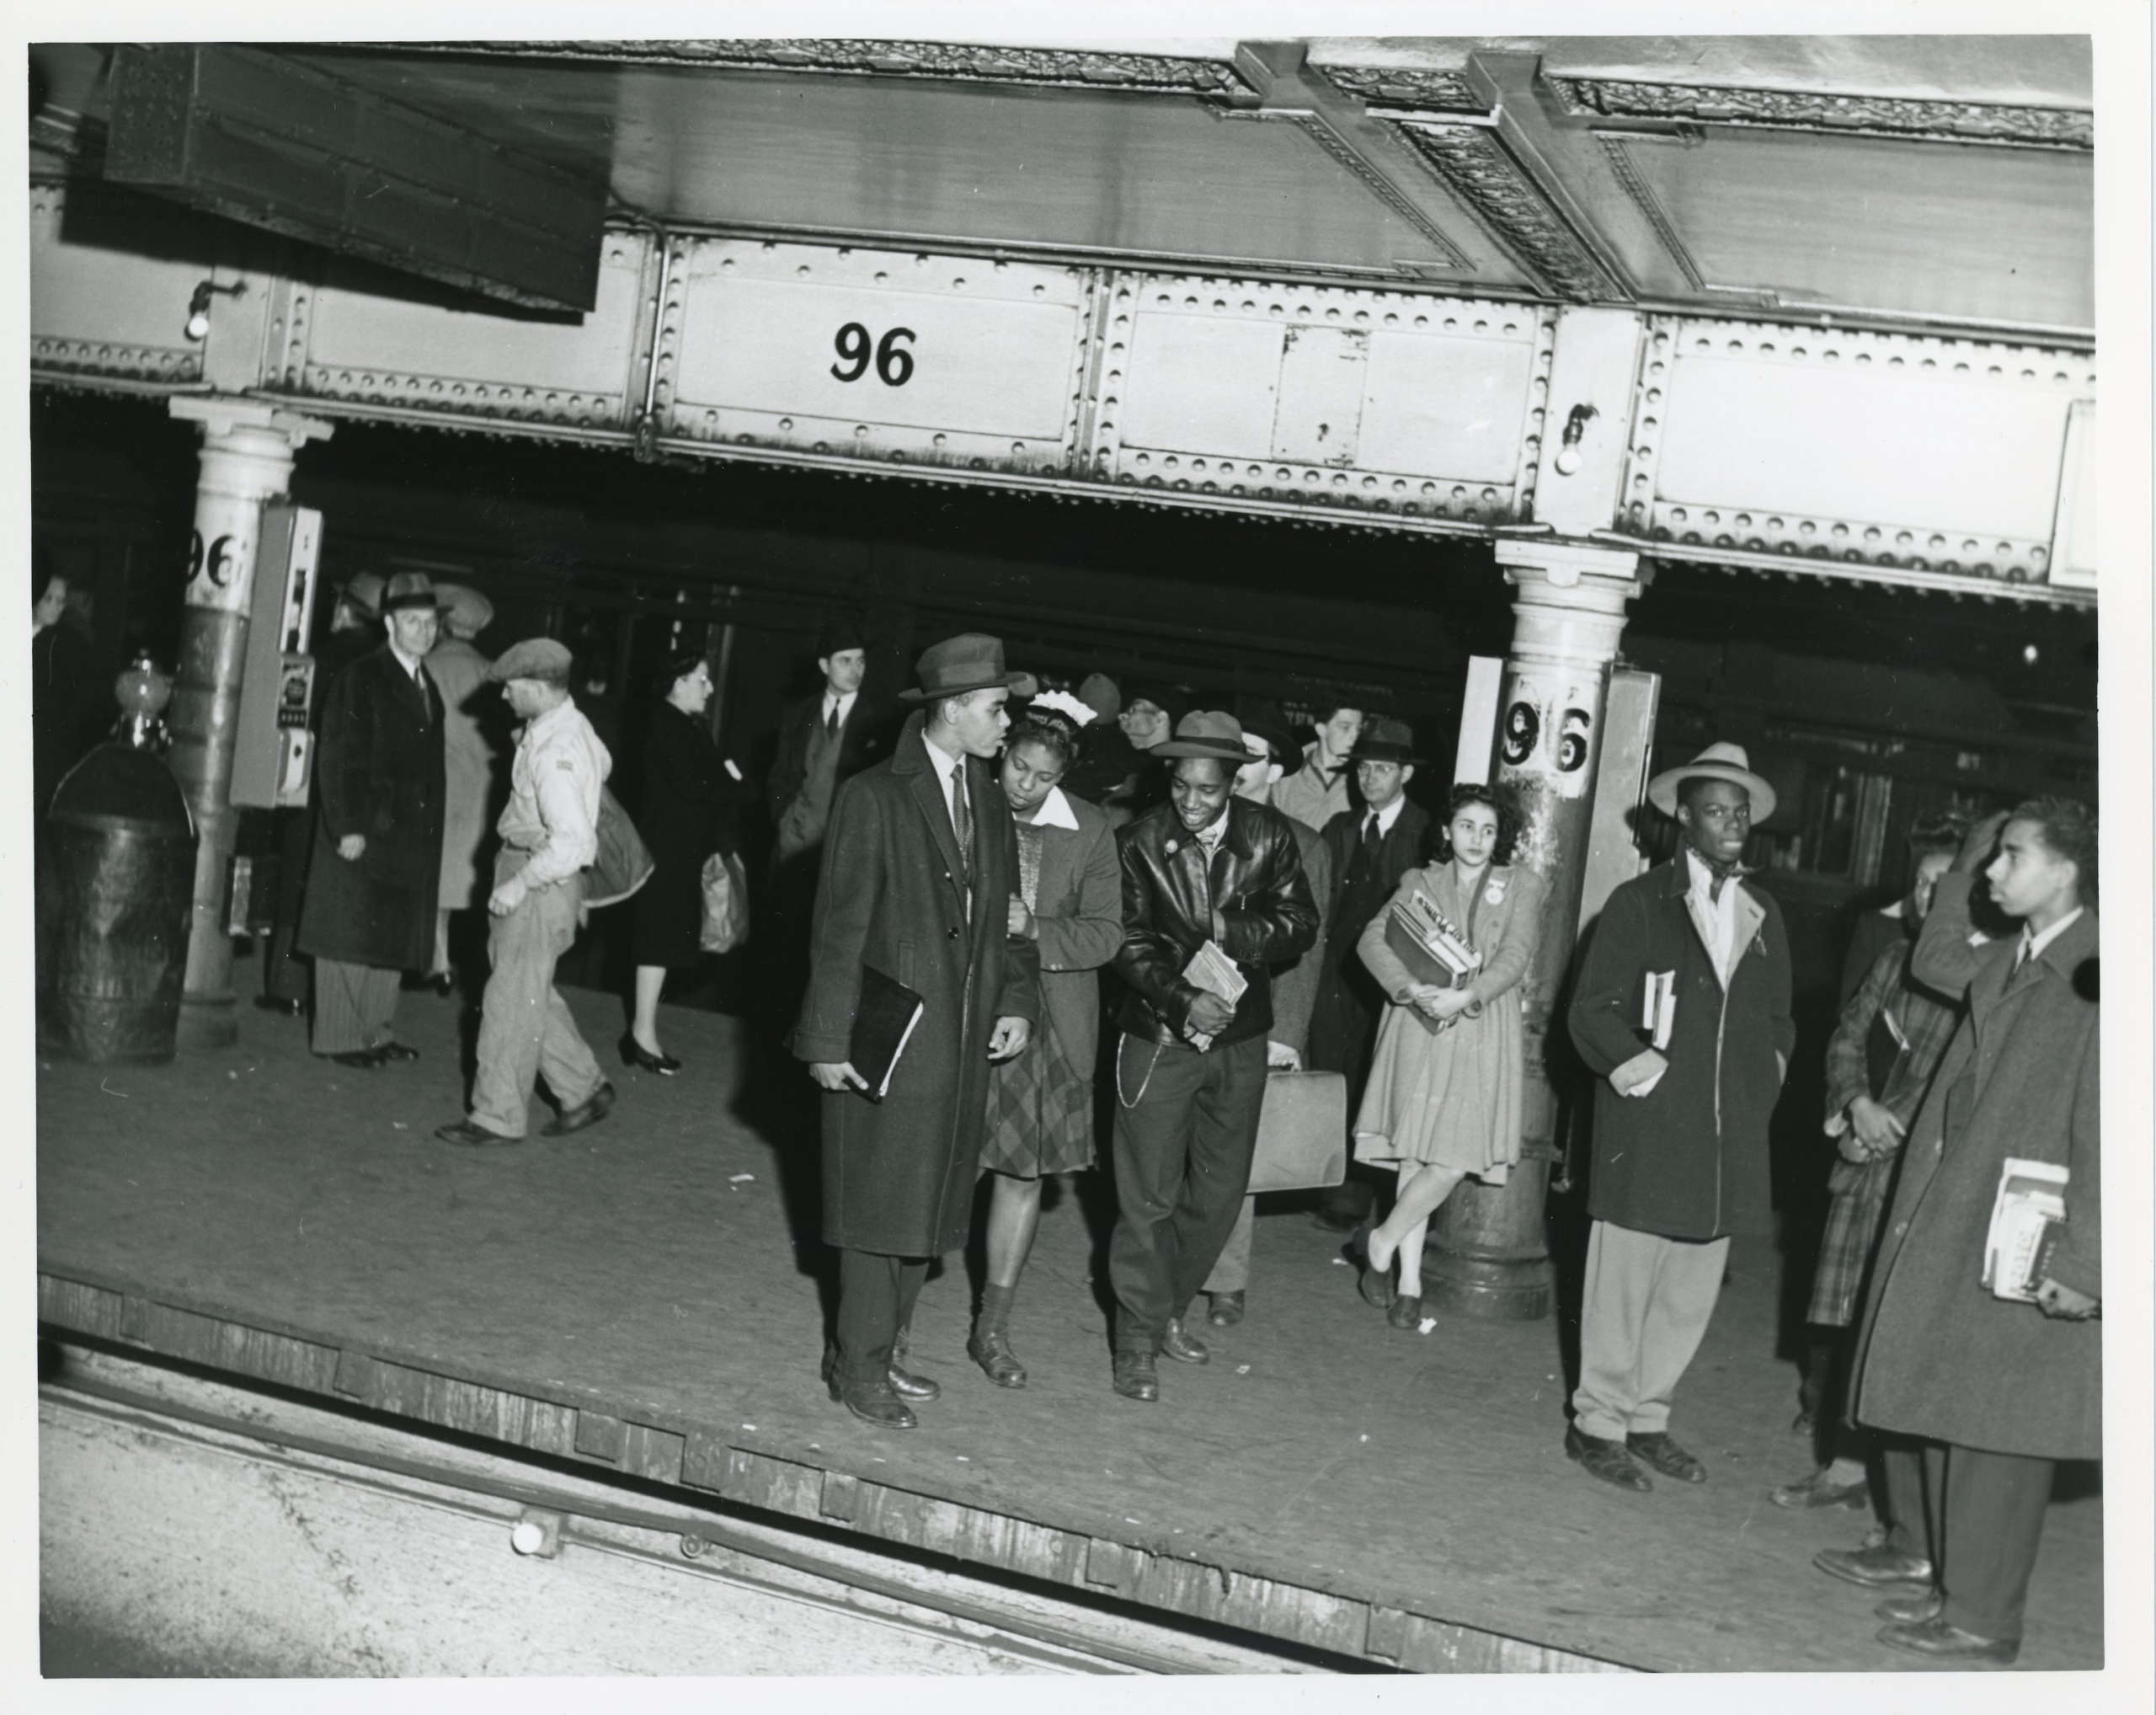 Young men and women stand on the subway platform at 96th street.